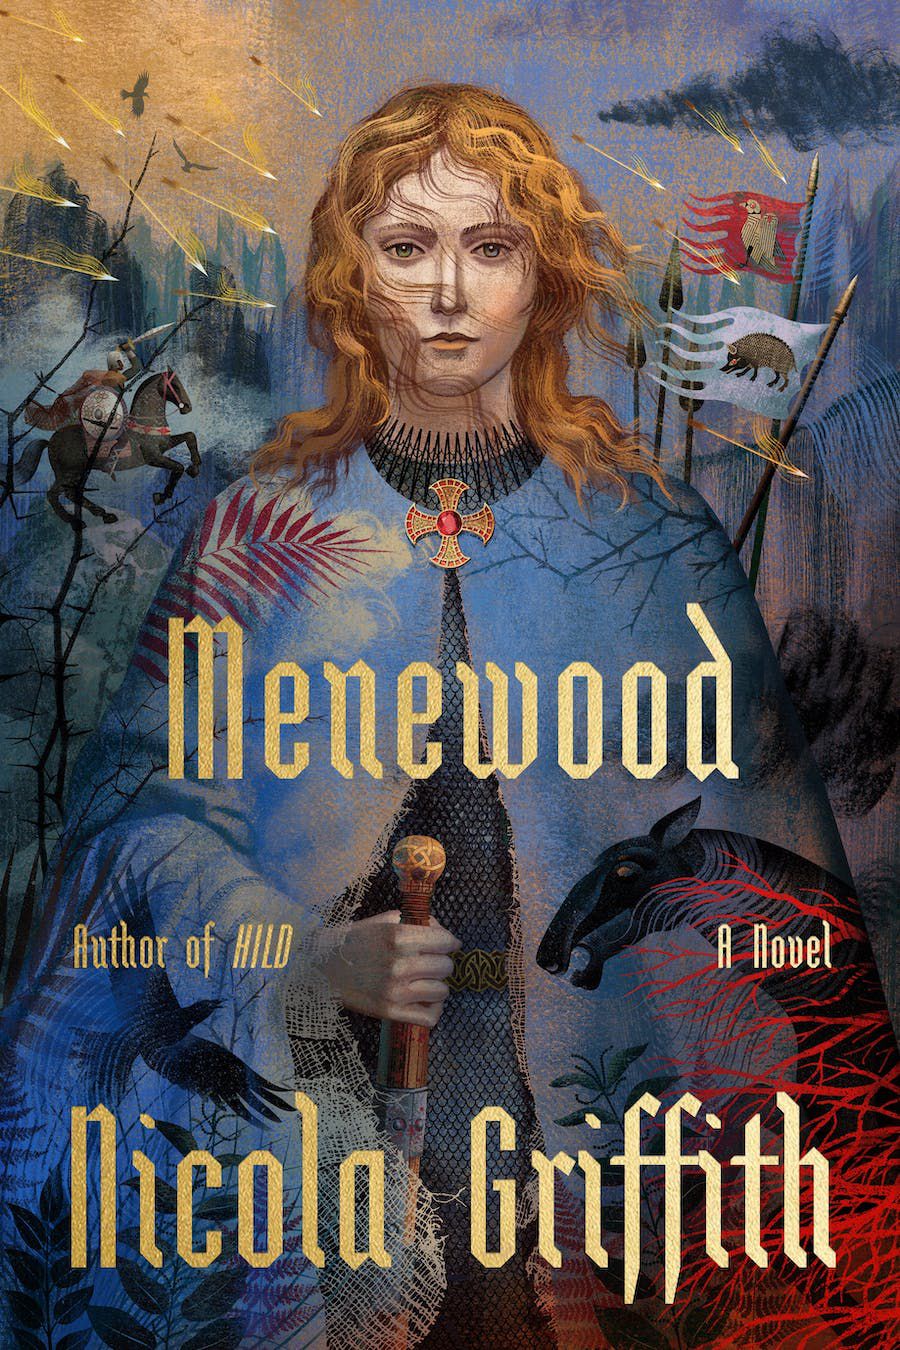 A woman in a medieval cloak with long, flowing red hair stands in the middle of the cover, holding a staff. Superimposed around her are images of a knight on horseback, flaming arrows, flags showing a red boar, and a mountain lion.